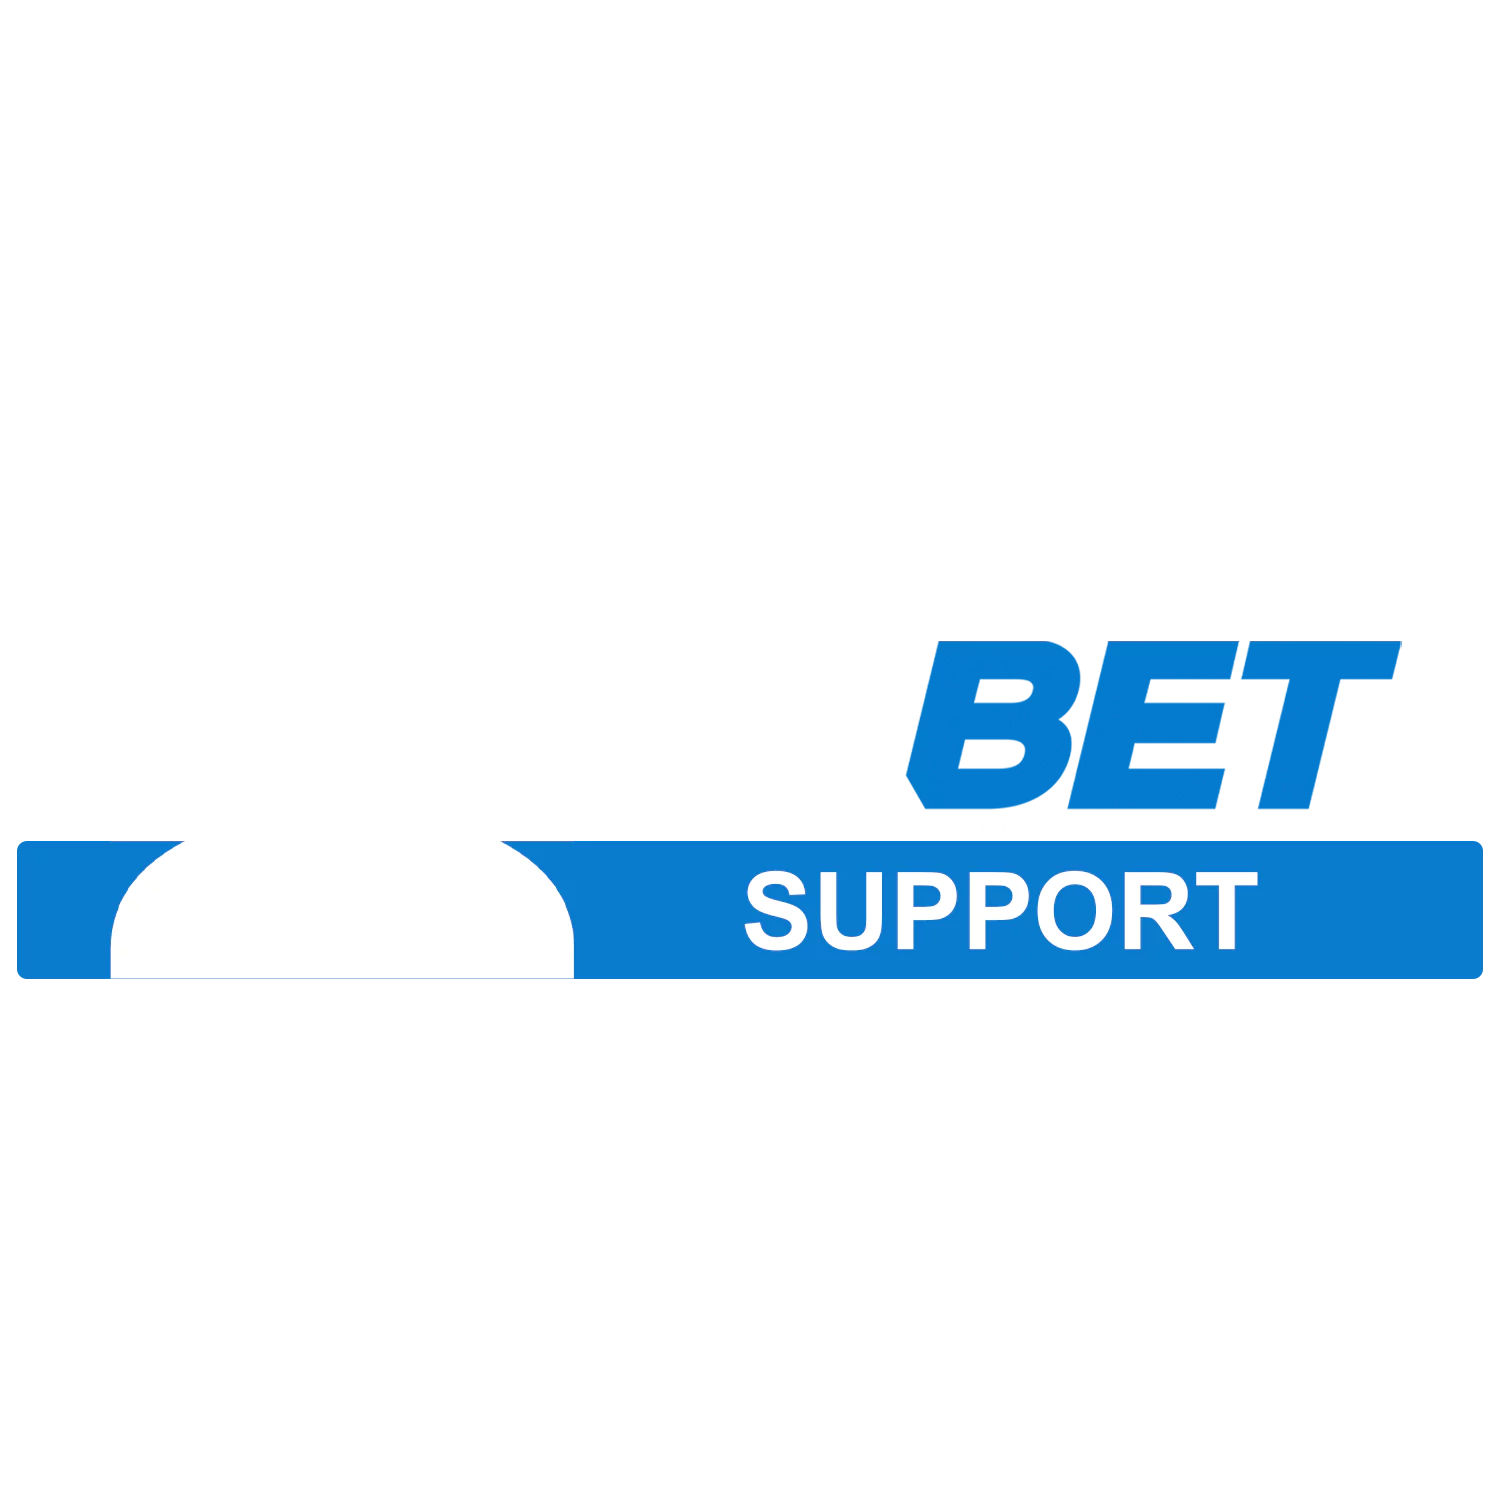 1xBet support service in Bangladesh is available 24 hours a day.